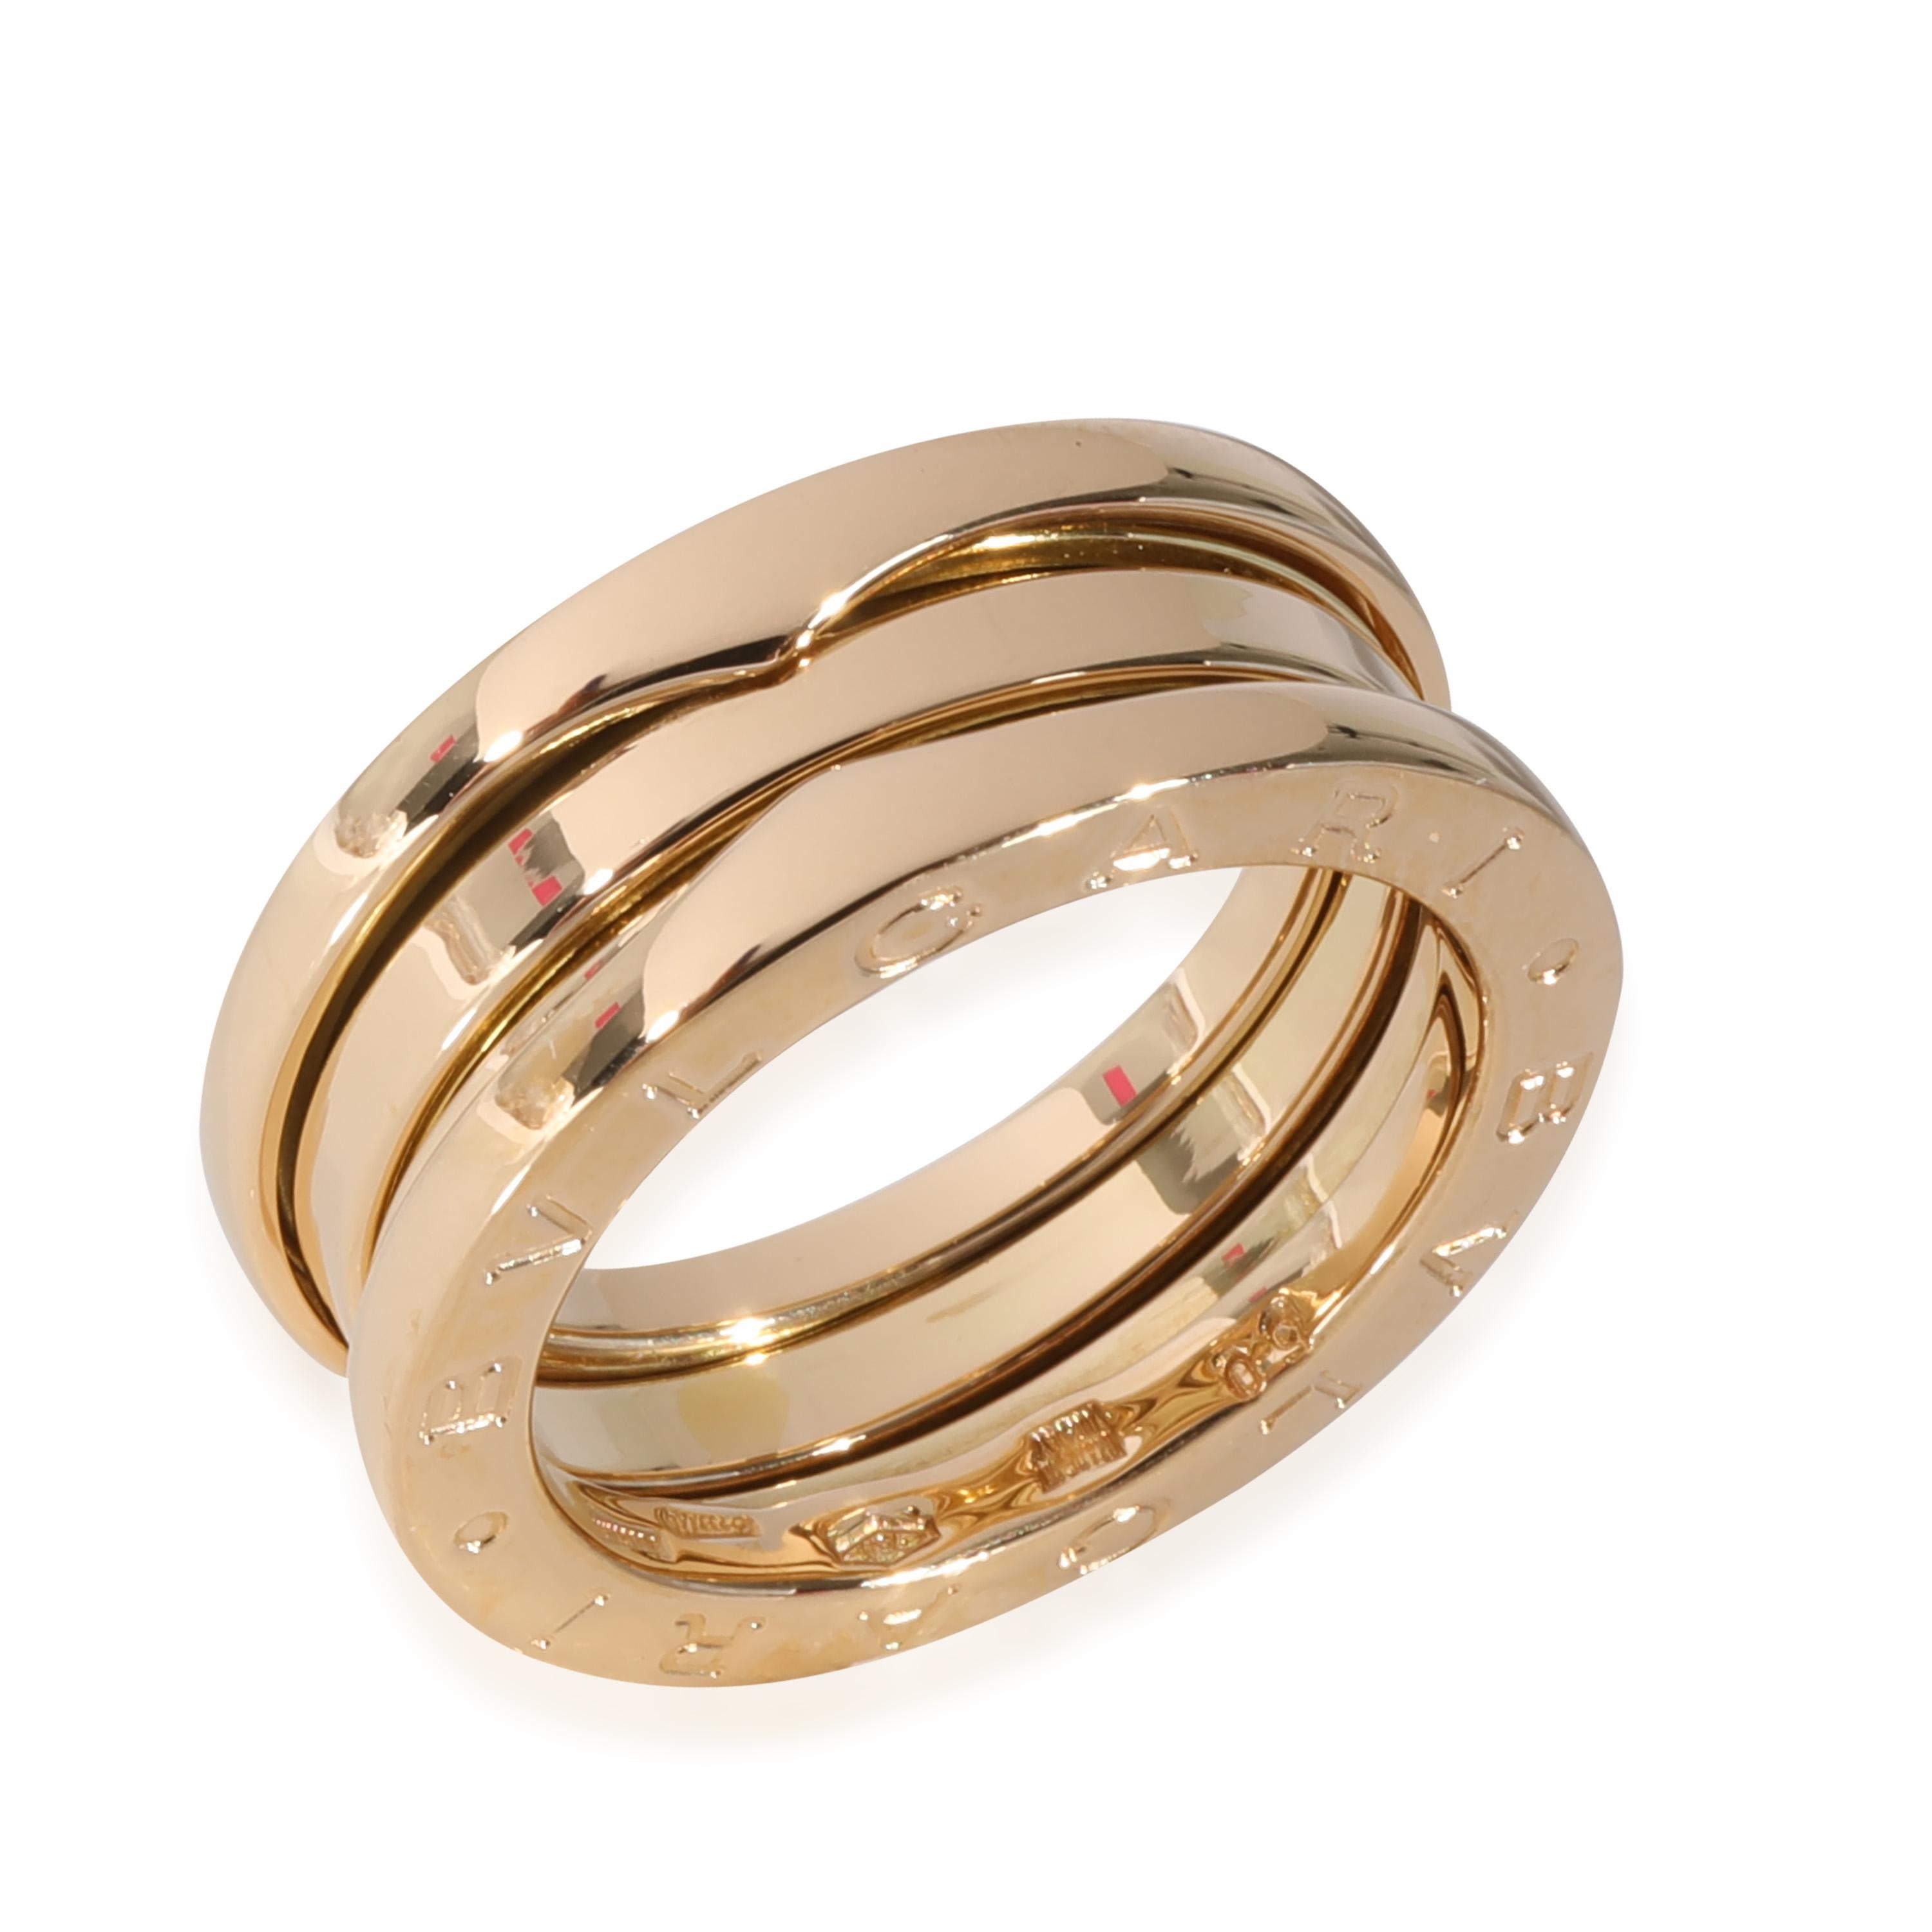 BVLGARI B.zero1 Ring in 18k Yellow Gold

PRIMARY DETAILS
SKU: 125354
Listing Title: BVLGARI B.zero1 Ring in 18k Yellow Gold
Condition Description: Retails for 2590 USD. In excellent condition and recently polished.  Comes with Box.
Brand: